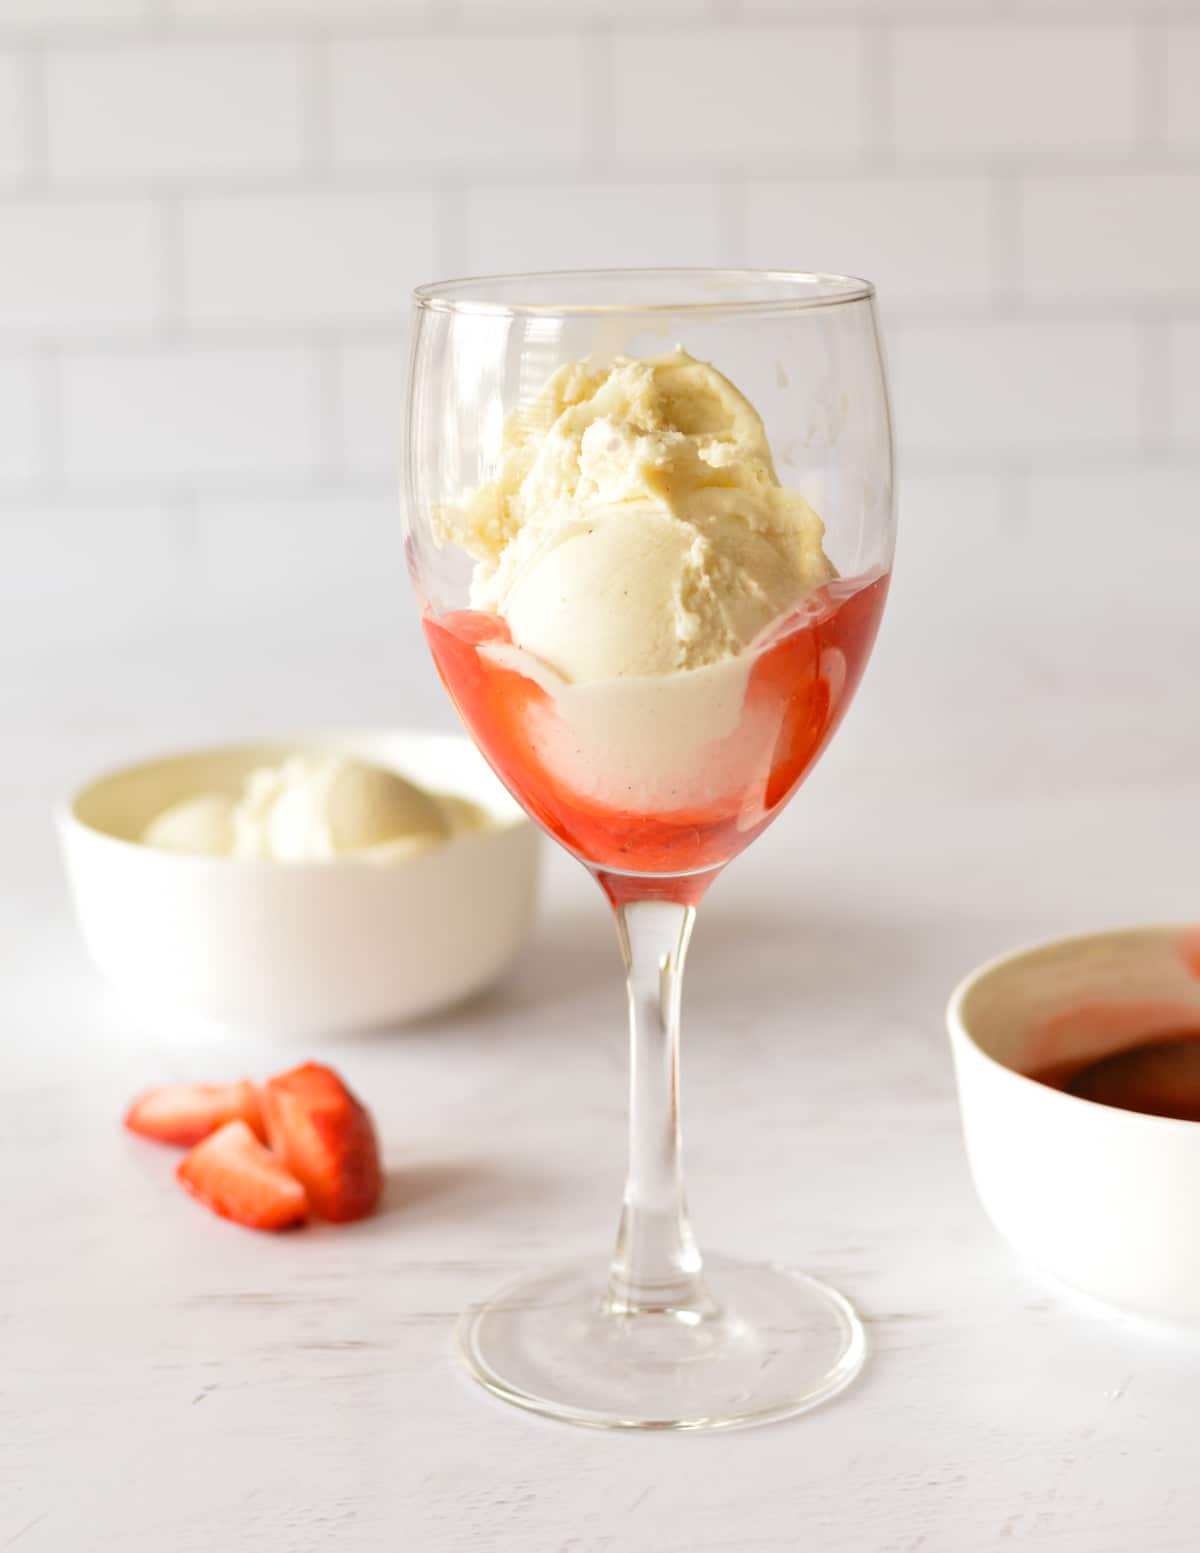 strawberry sauce and ice cream in a glass.